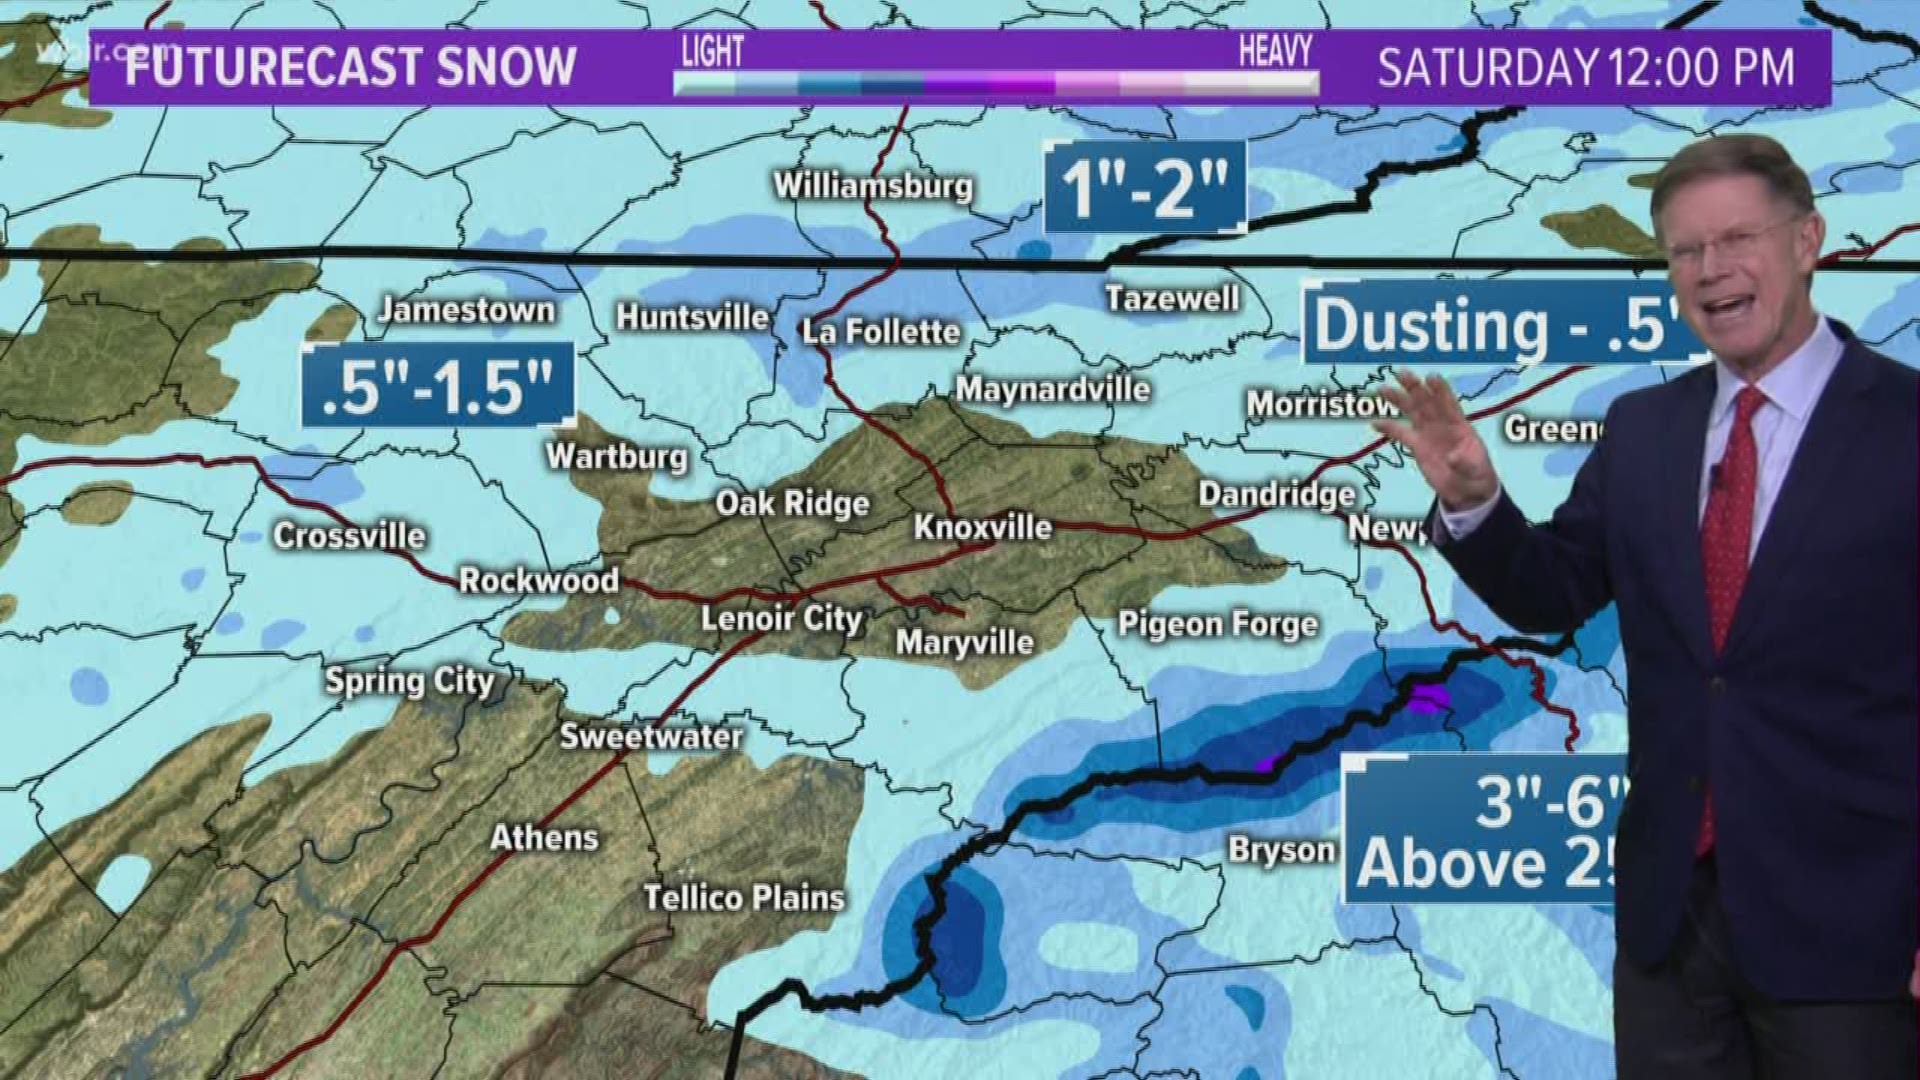 WINTER WEATHER ADVISORIES will be in effect for parts of the Cumberland Plateau, SE Kentucky and the Mountains on Friday. No advisories for the Valley.